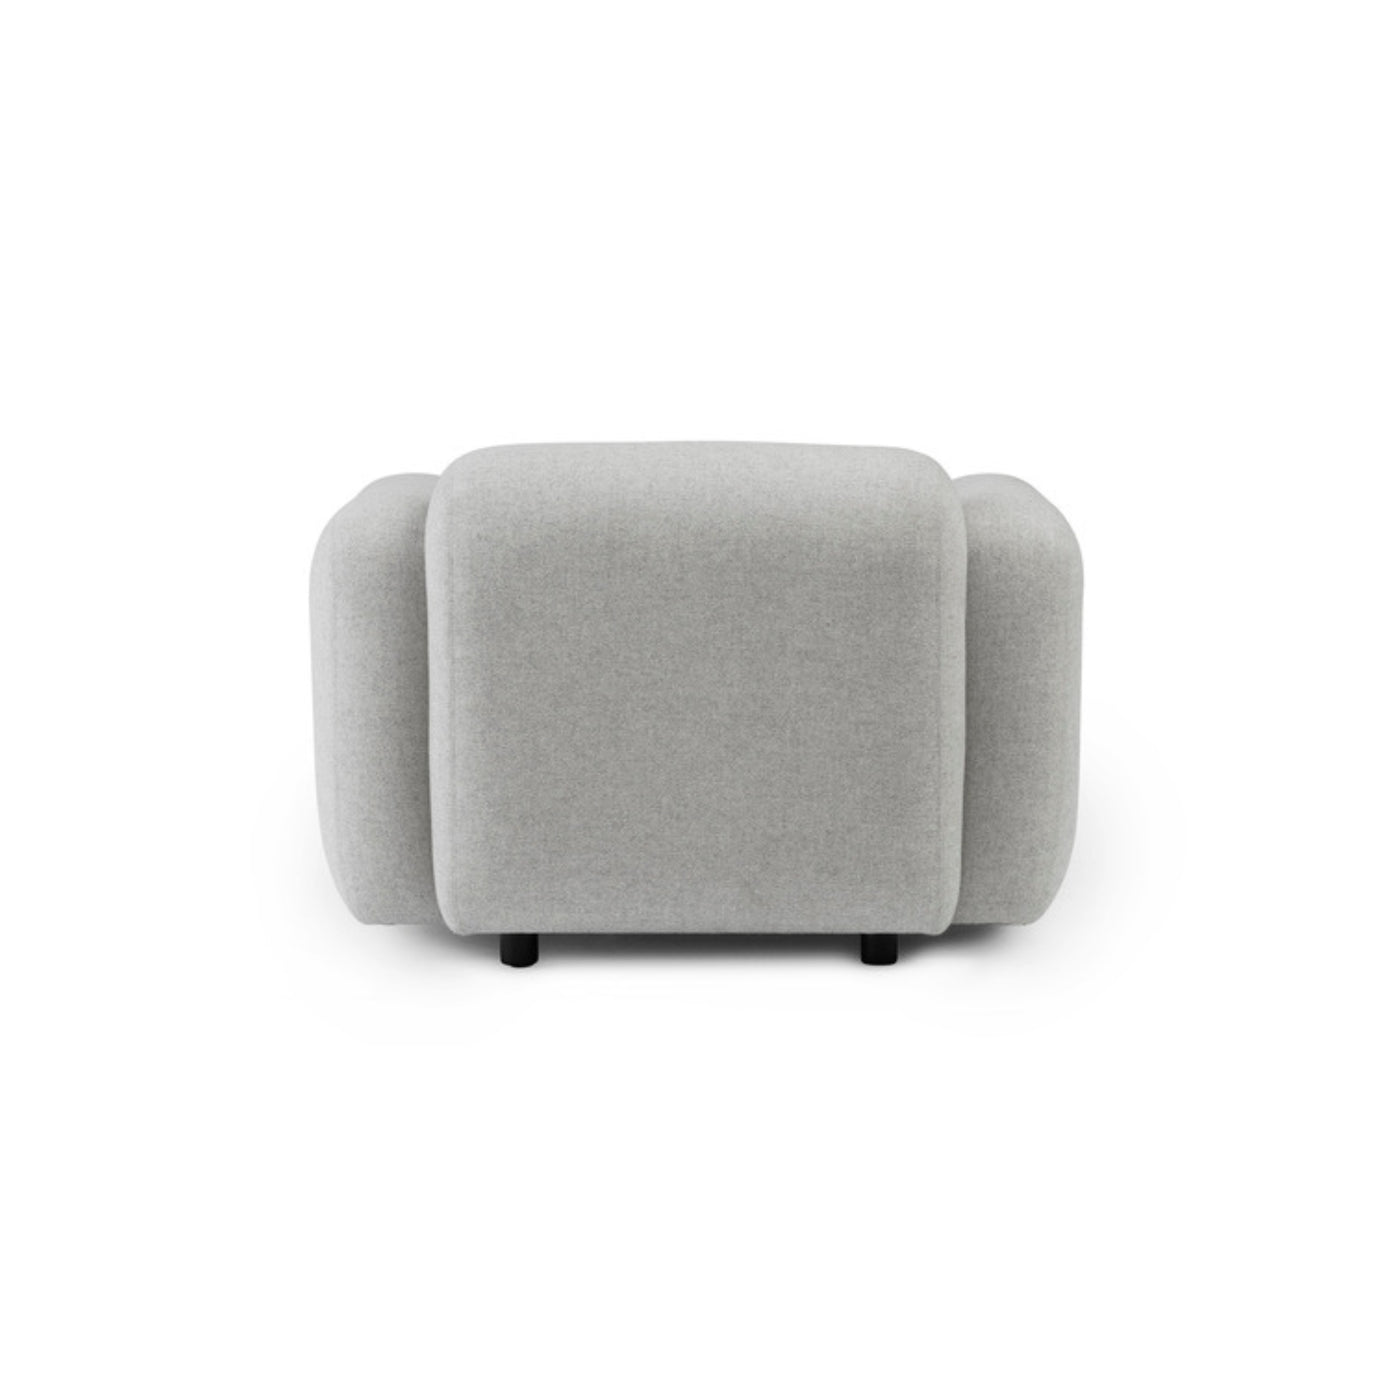 Normann Copenhagen Swell Armchair at someday designs. #colour_synergy-serendipity